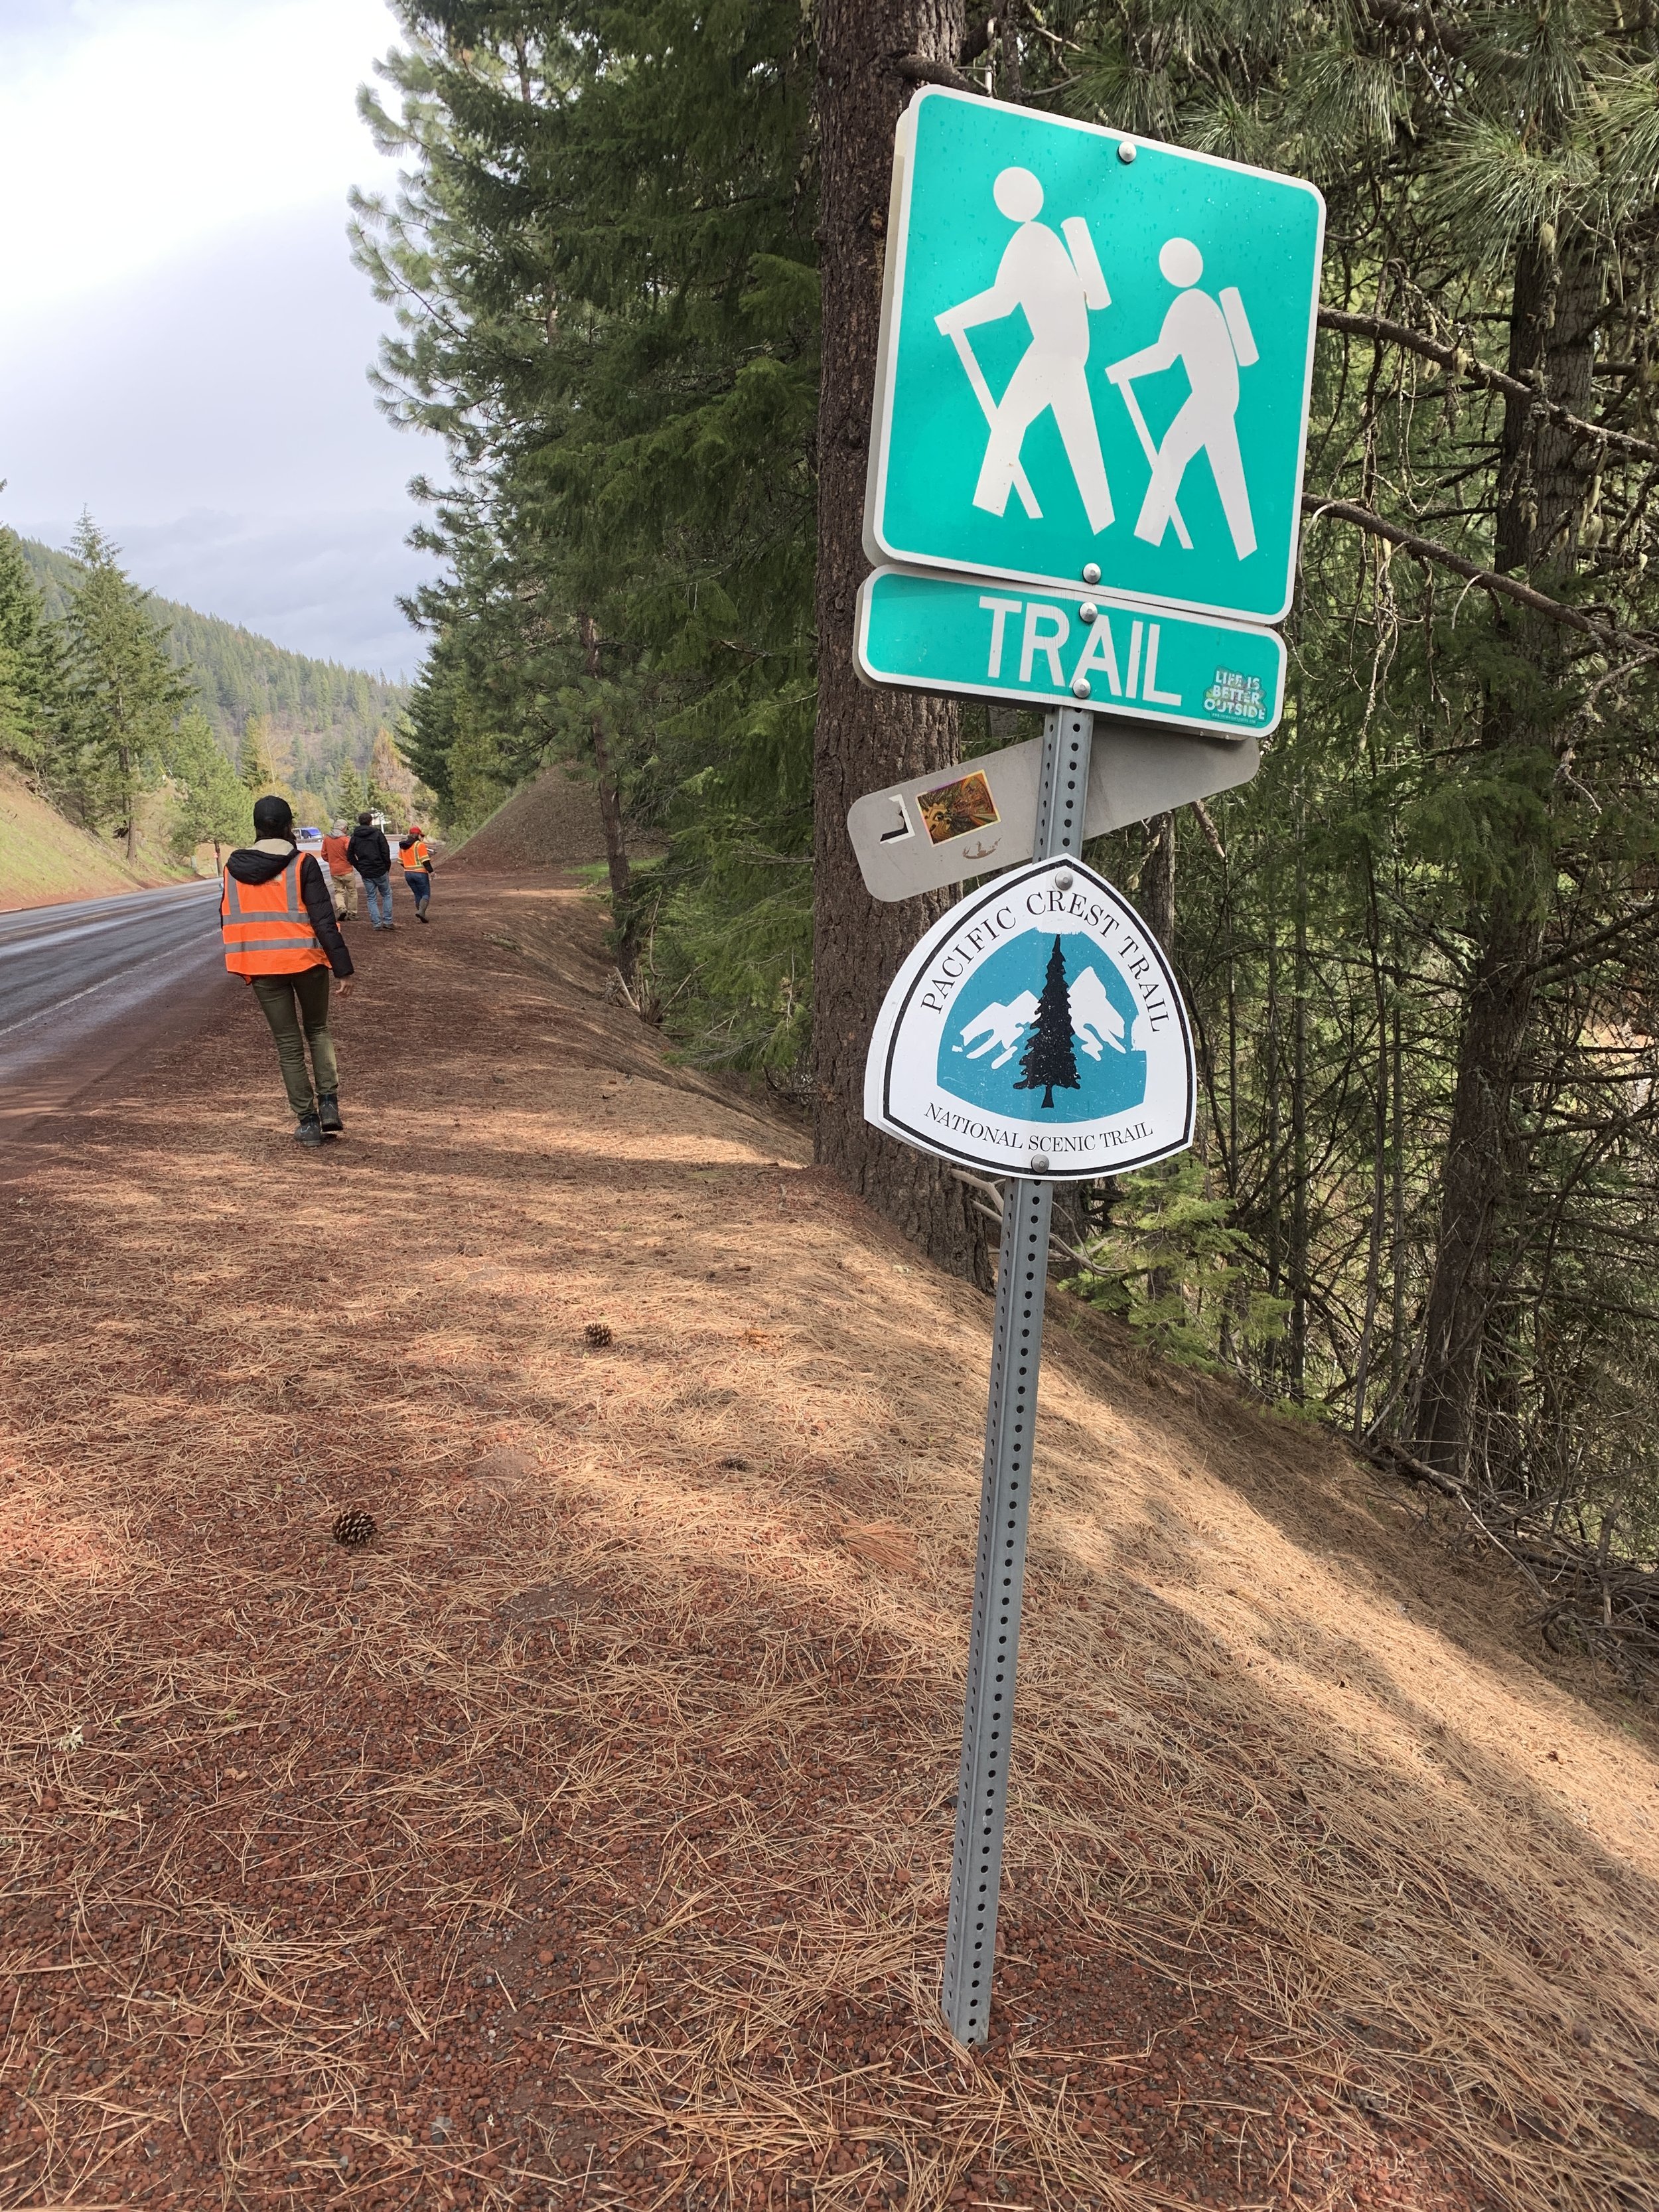  Several of the sites we visited along I-5 intersected the Pacific Crest Trail. 